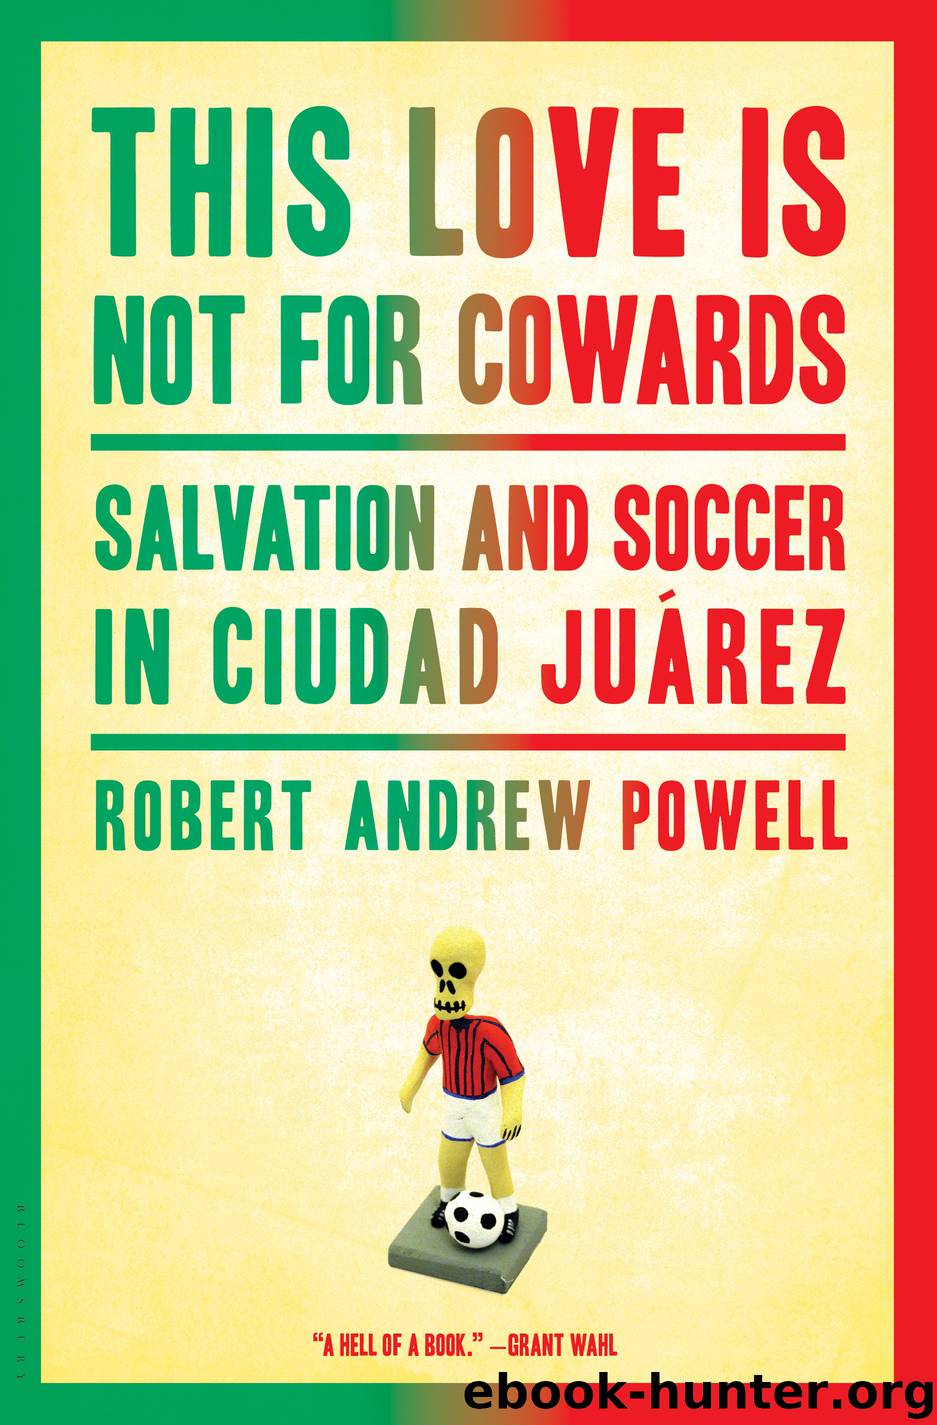 This Love Is Not for Cowards by Robert Andrew Powell